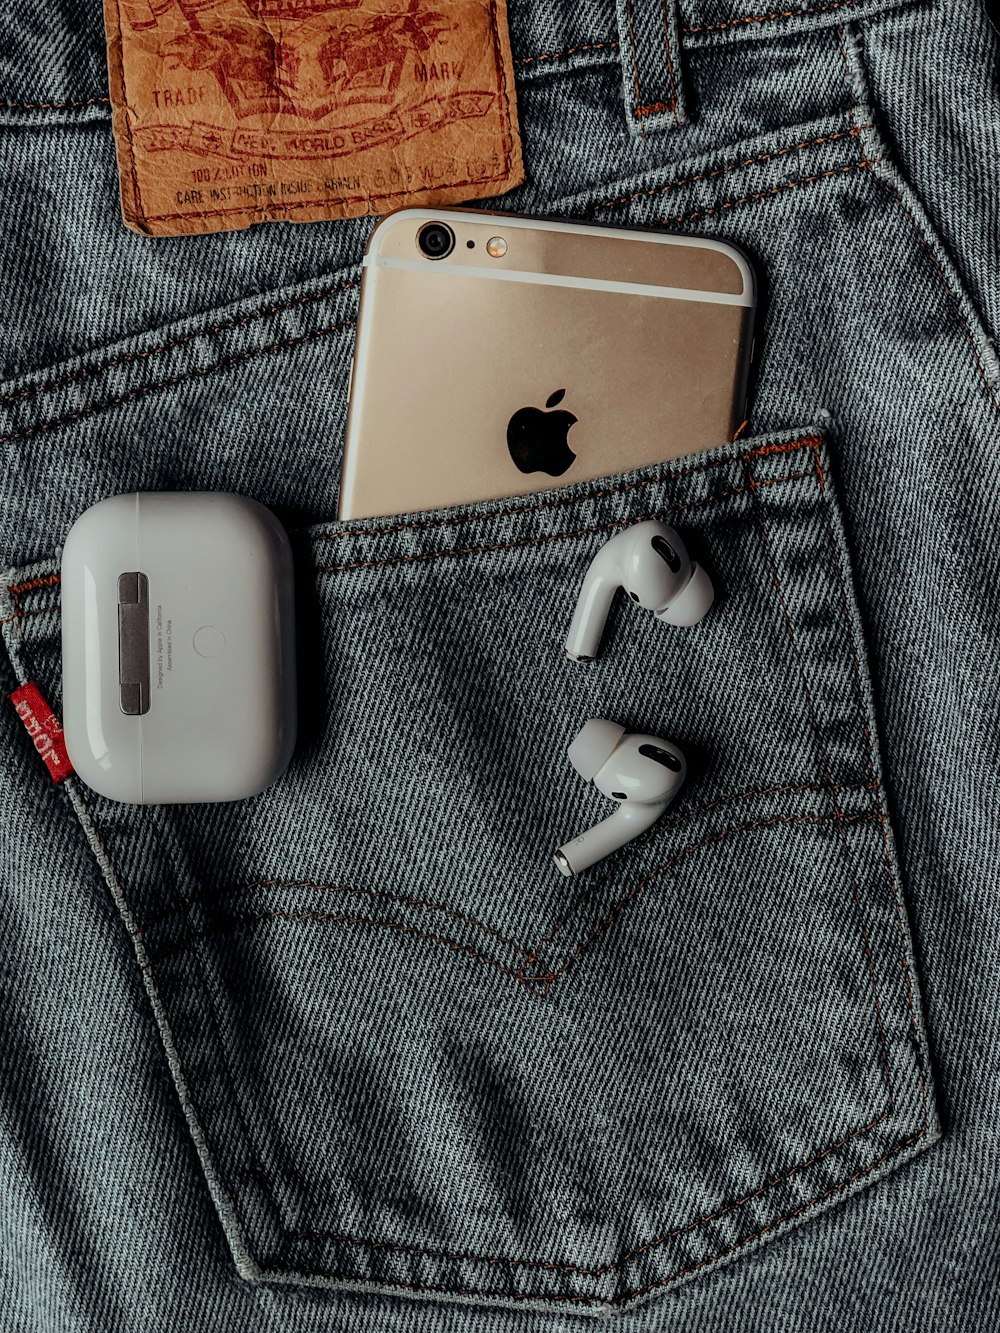 white apple airpods on silver iphone 6